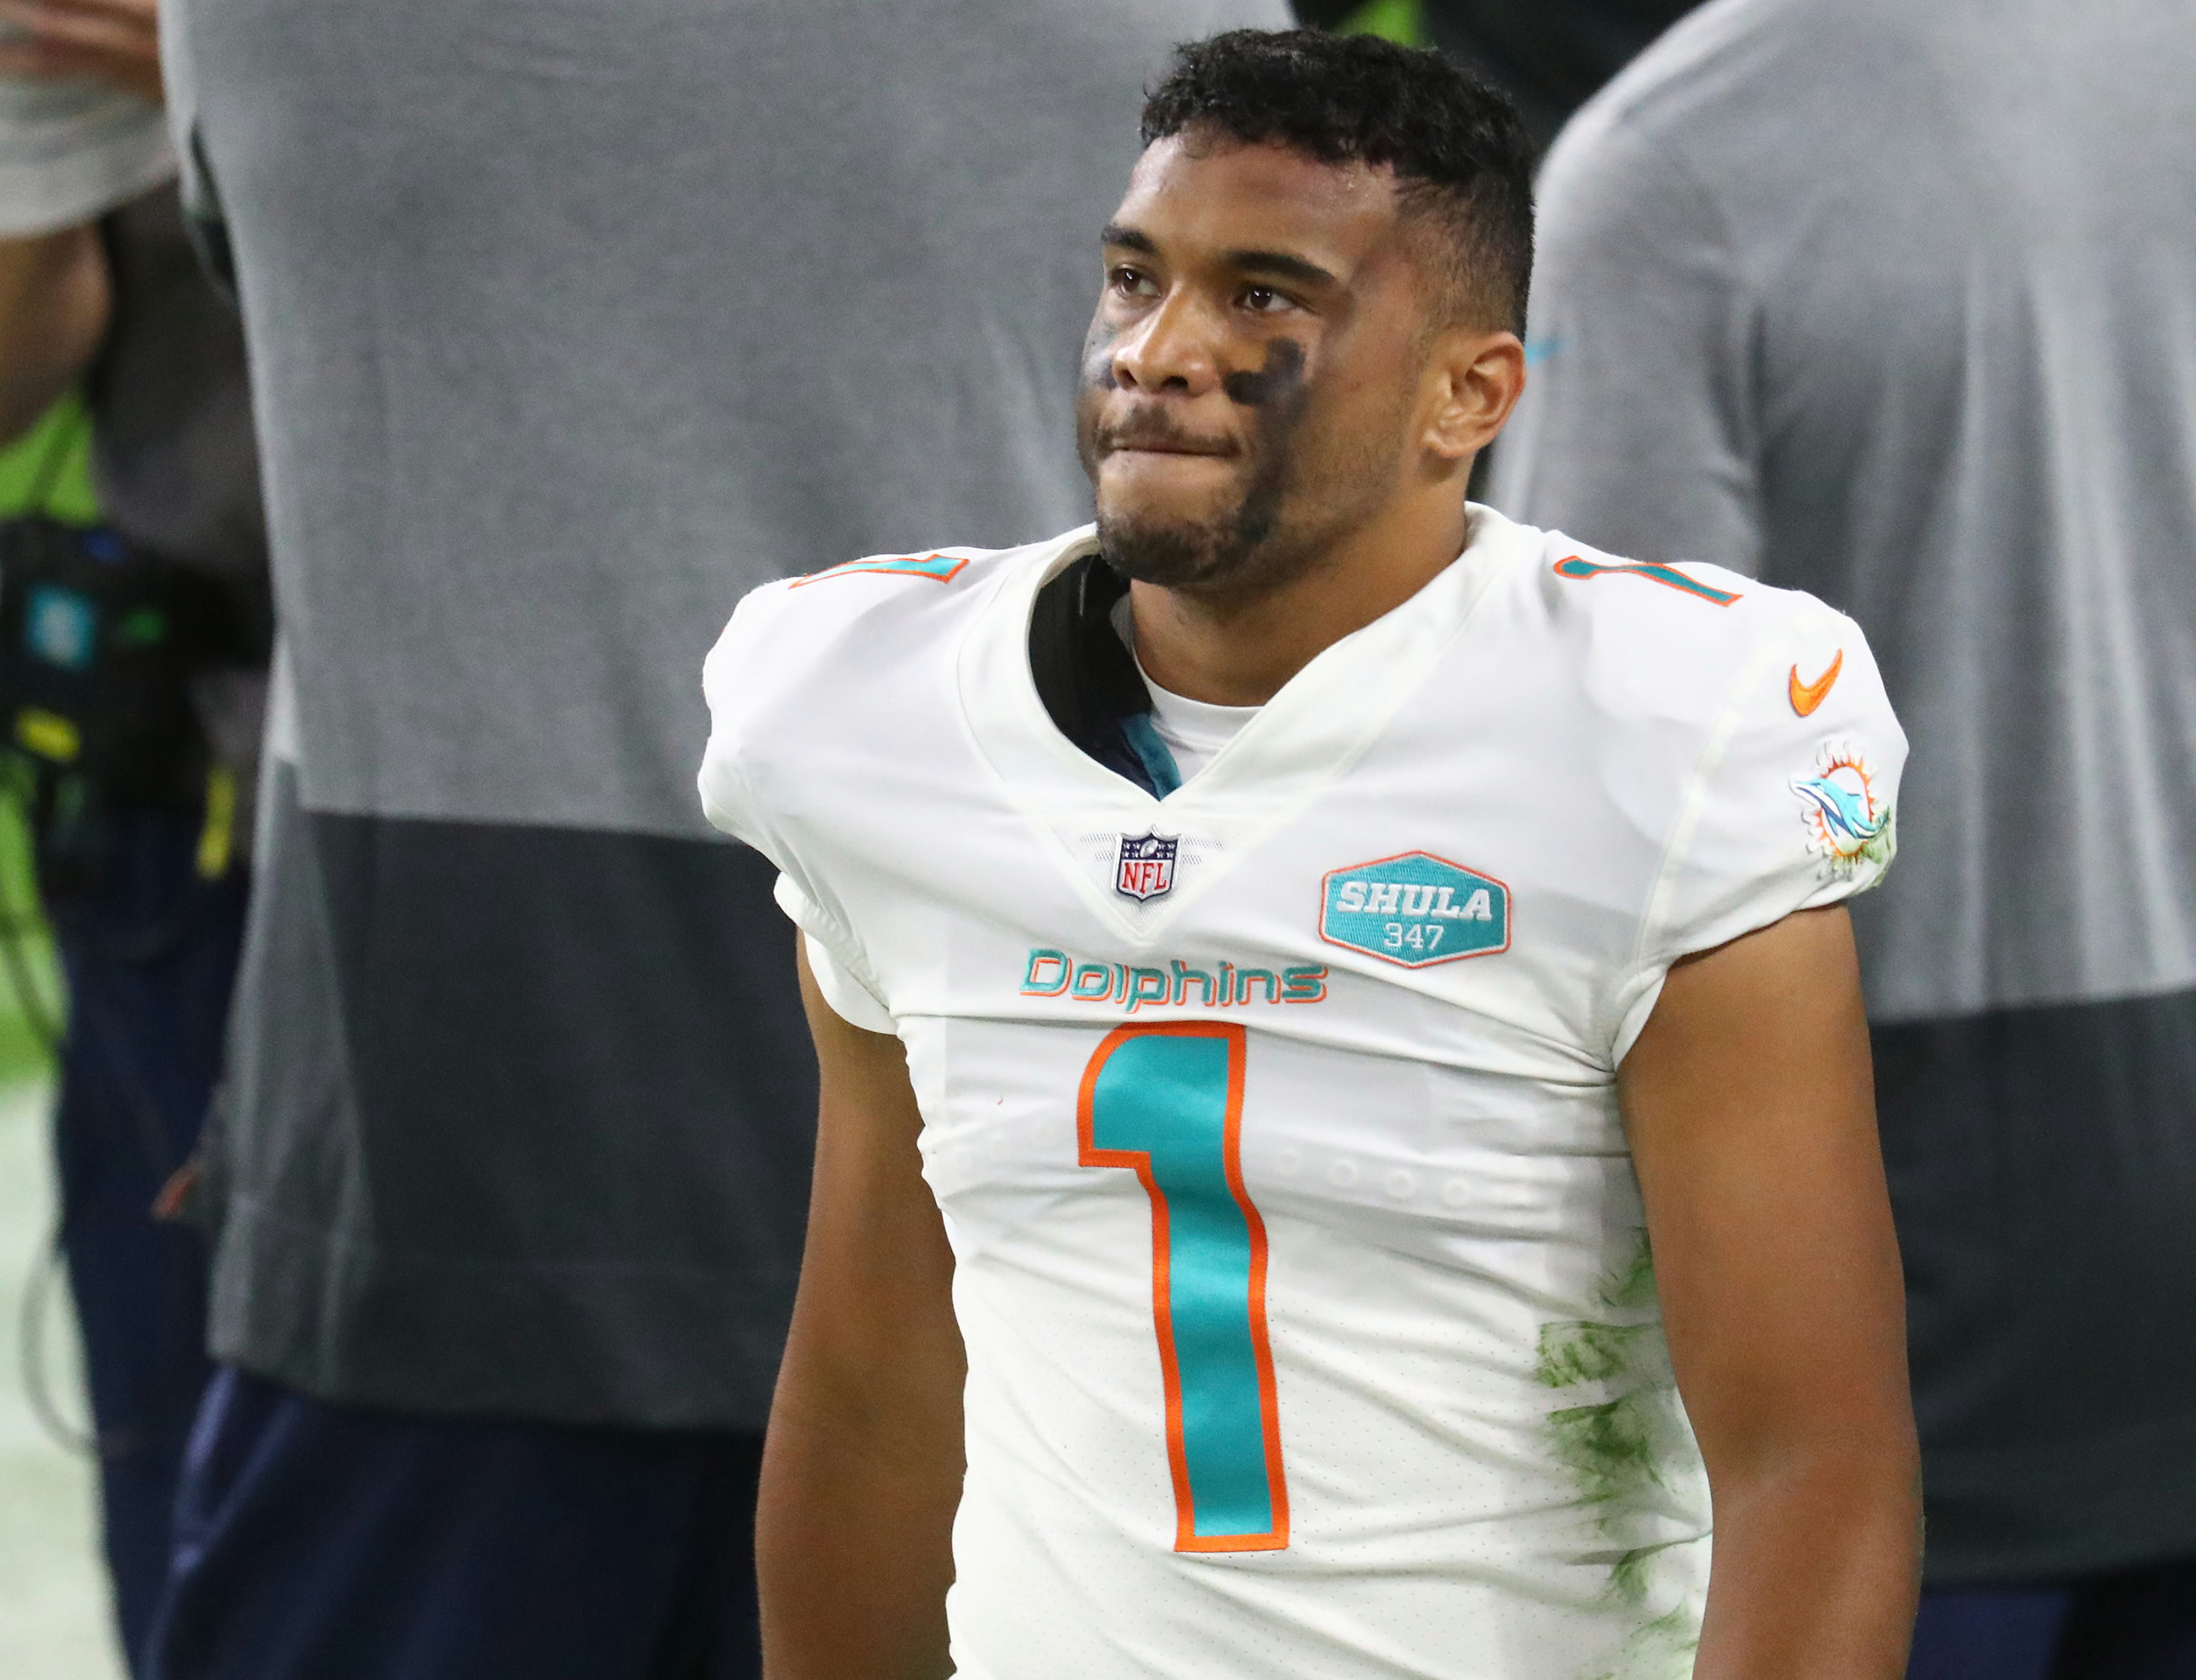 Dolphins 3 options with 3rd overall pick in 2021 NFL Draft